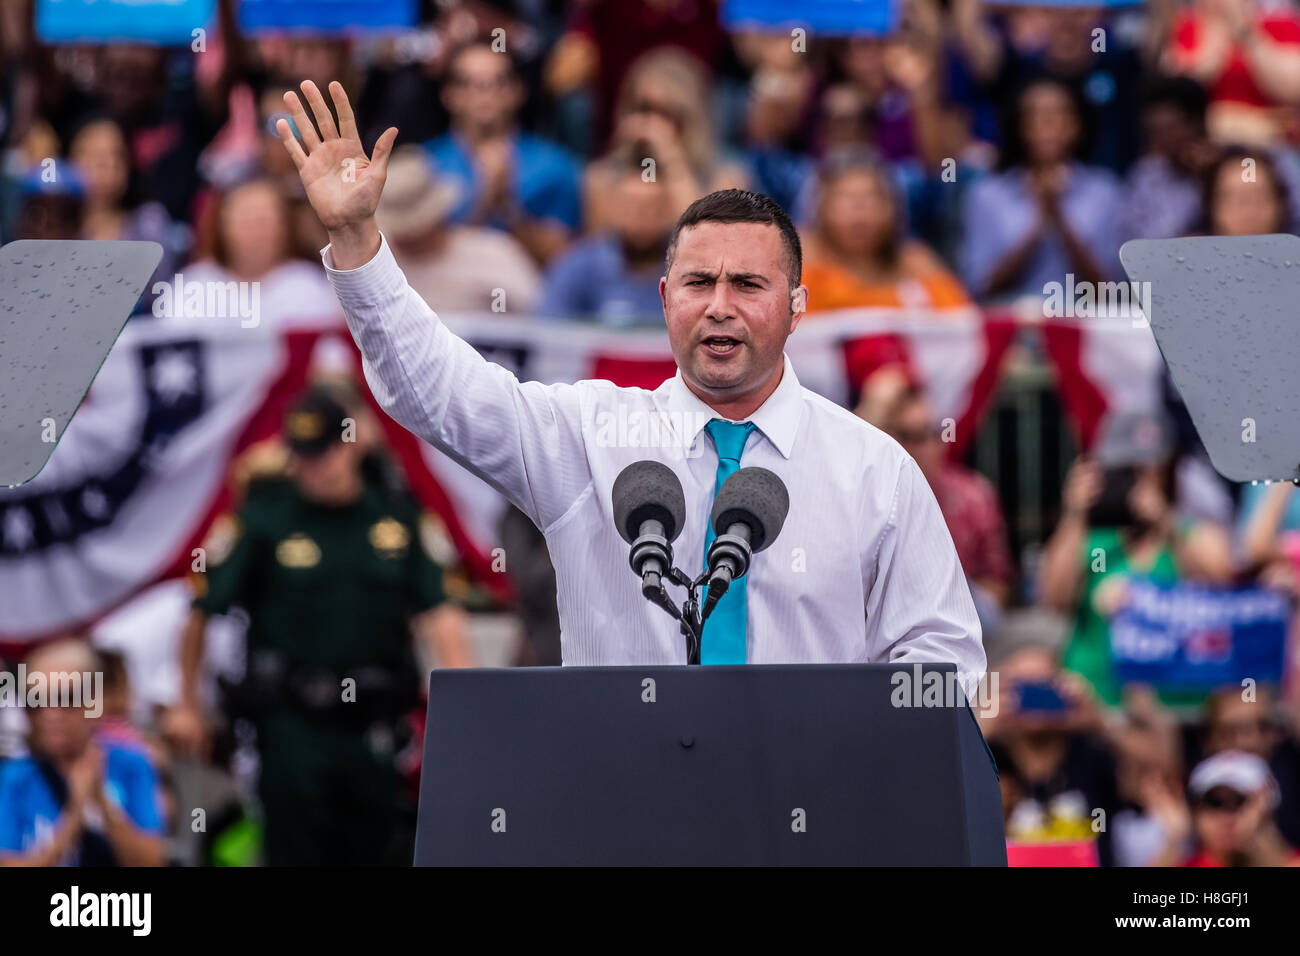 Florida Congressional Candidate, Darren Soto speaks at President Barack Obama's campaign rally for Hillary Clinton on Sunday November 6, 2016 at Heritage Park in Kissimmee, Florida. Stock Photo